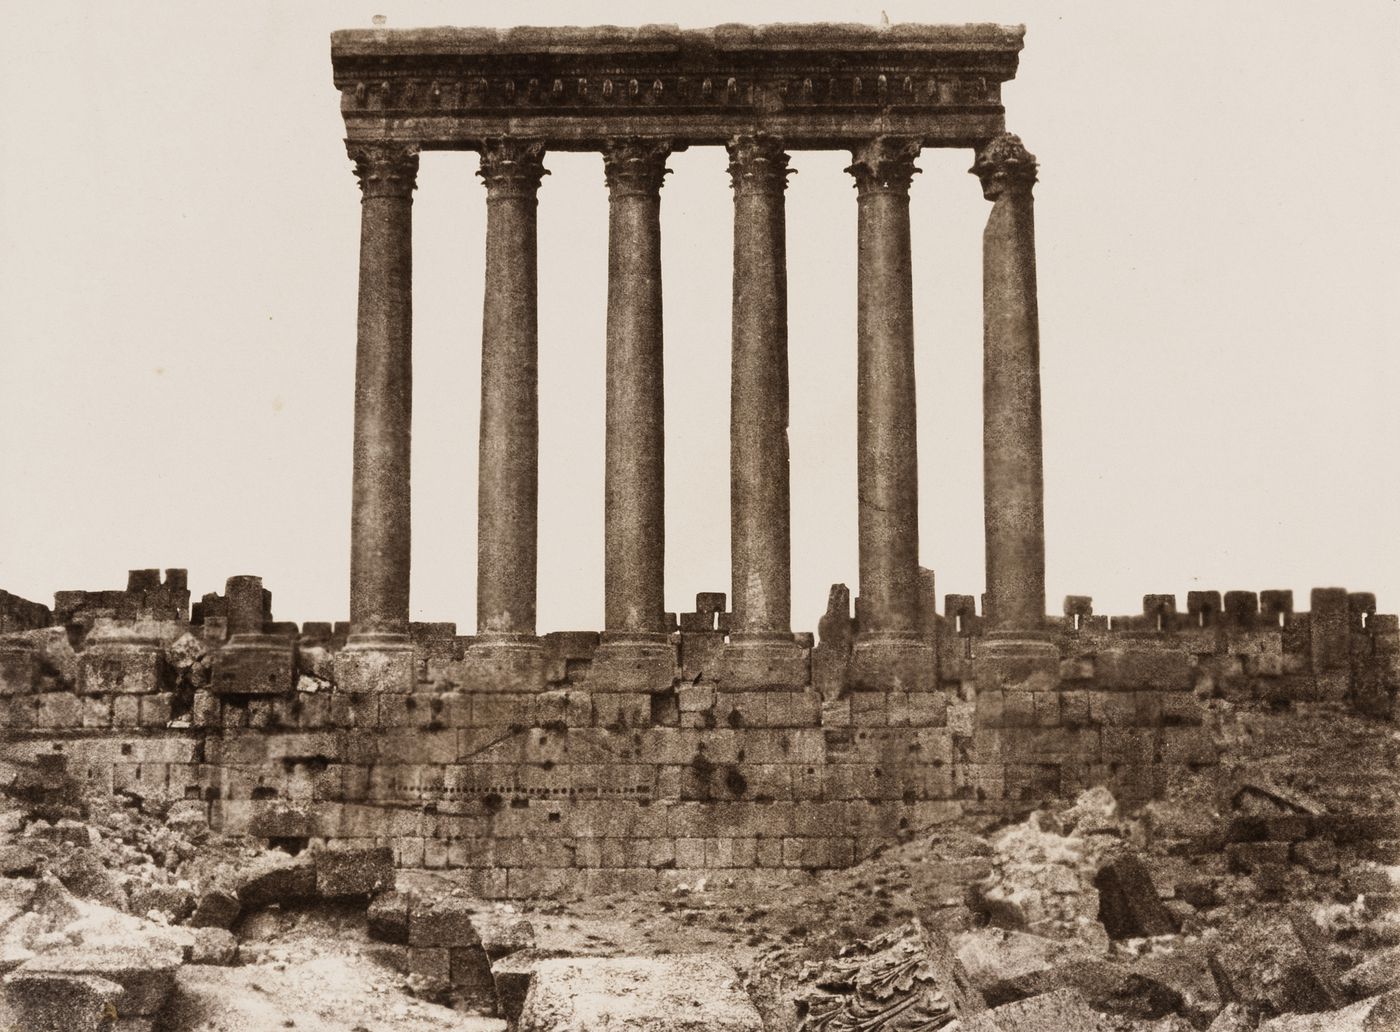 View of the ruins of the Temple of the Sun, Baalbek, Ottoman Empire (now in Lebanon)